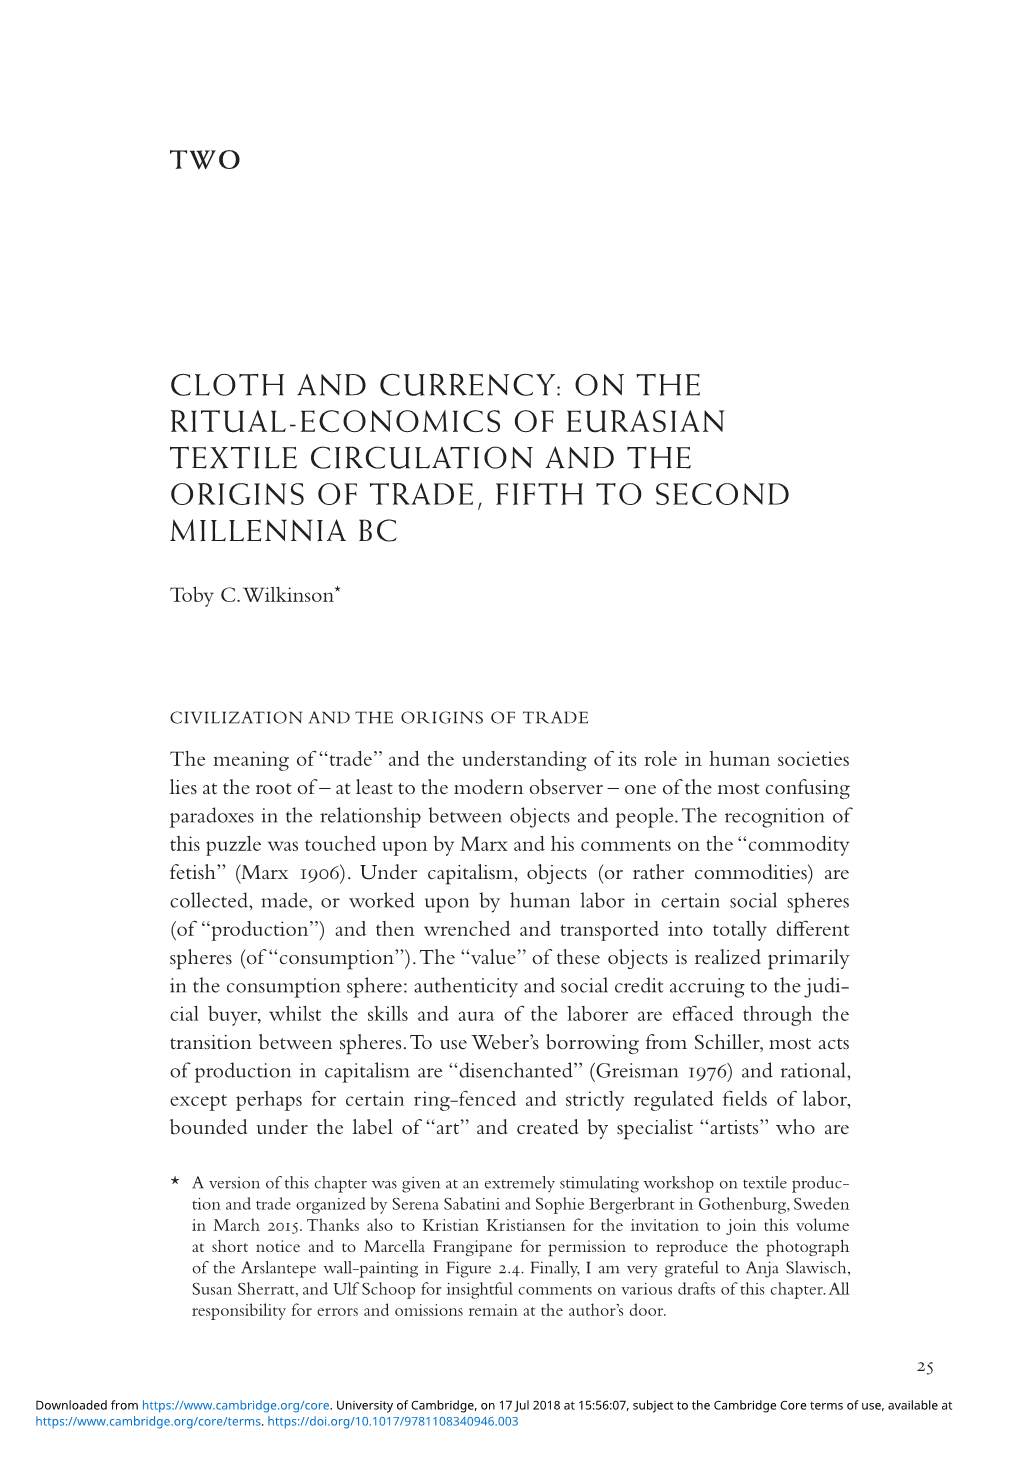 Cloth and Currency: on the Ritual- Economics of Eurasian Textile Circulation and the Origins of Trade, Fifth to Second Millenni